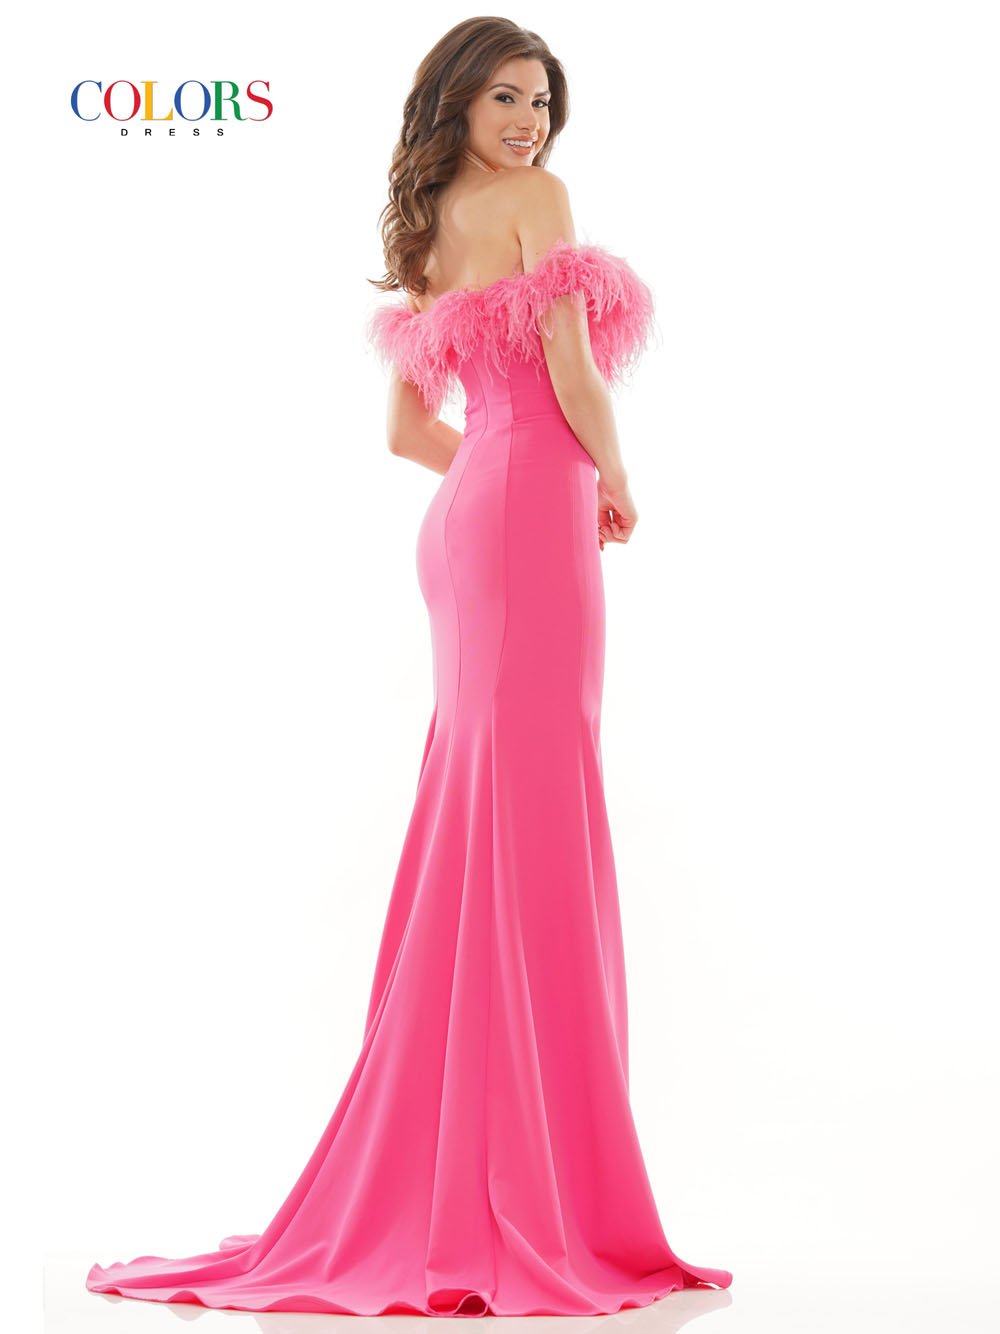 Colors Dress 2663 prom dress images.  Colors Dress 2663 is available in these colors: Hot Pink, Light Blue, Red, Royal,  White.